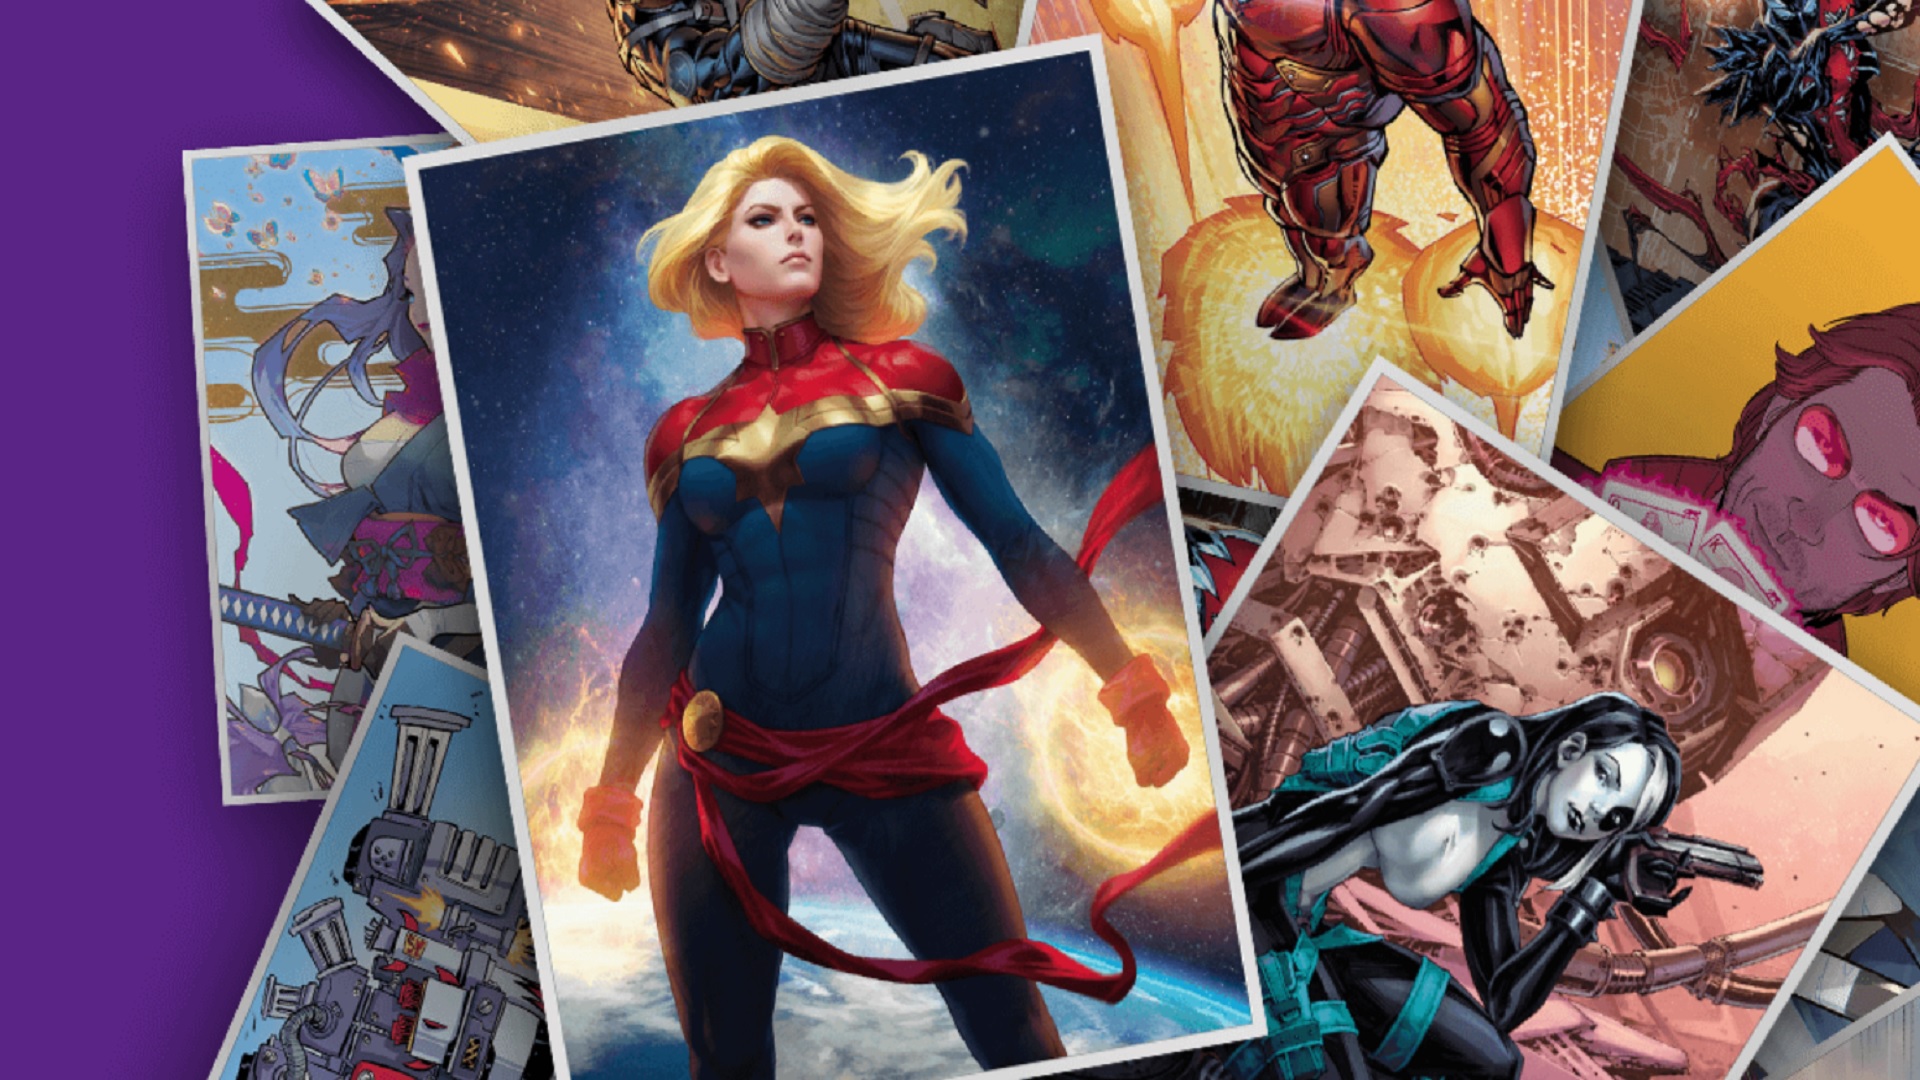 Next Marvel Snap season release date, cards, locations, and theme